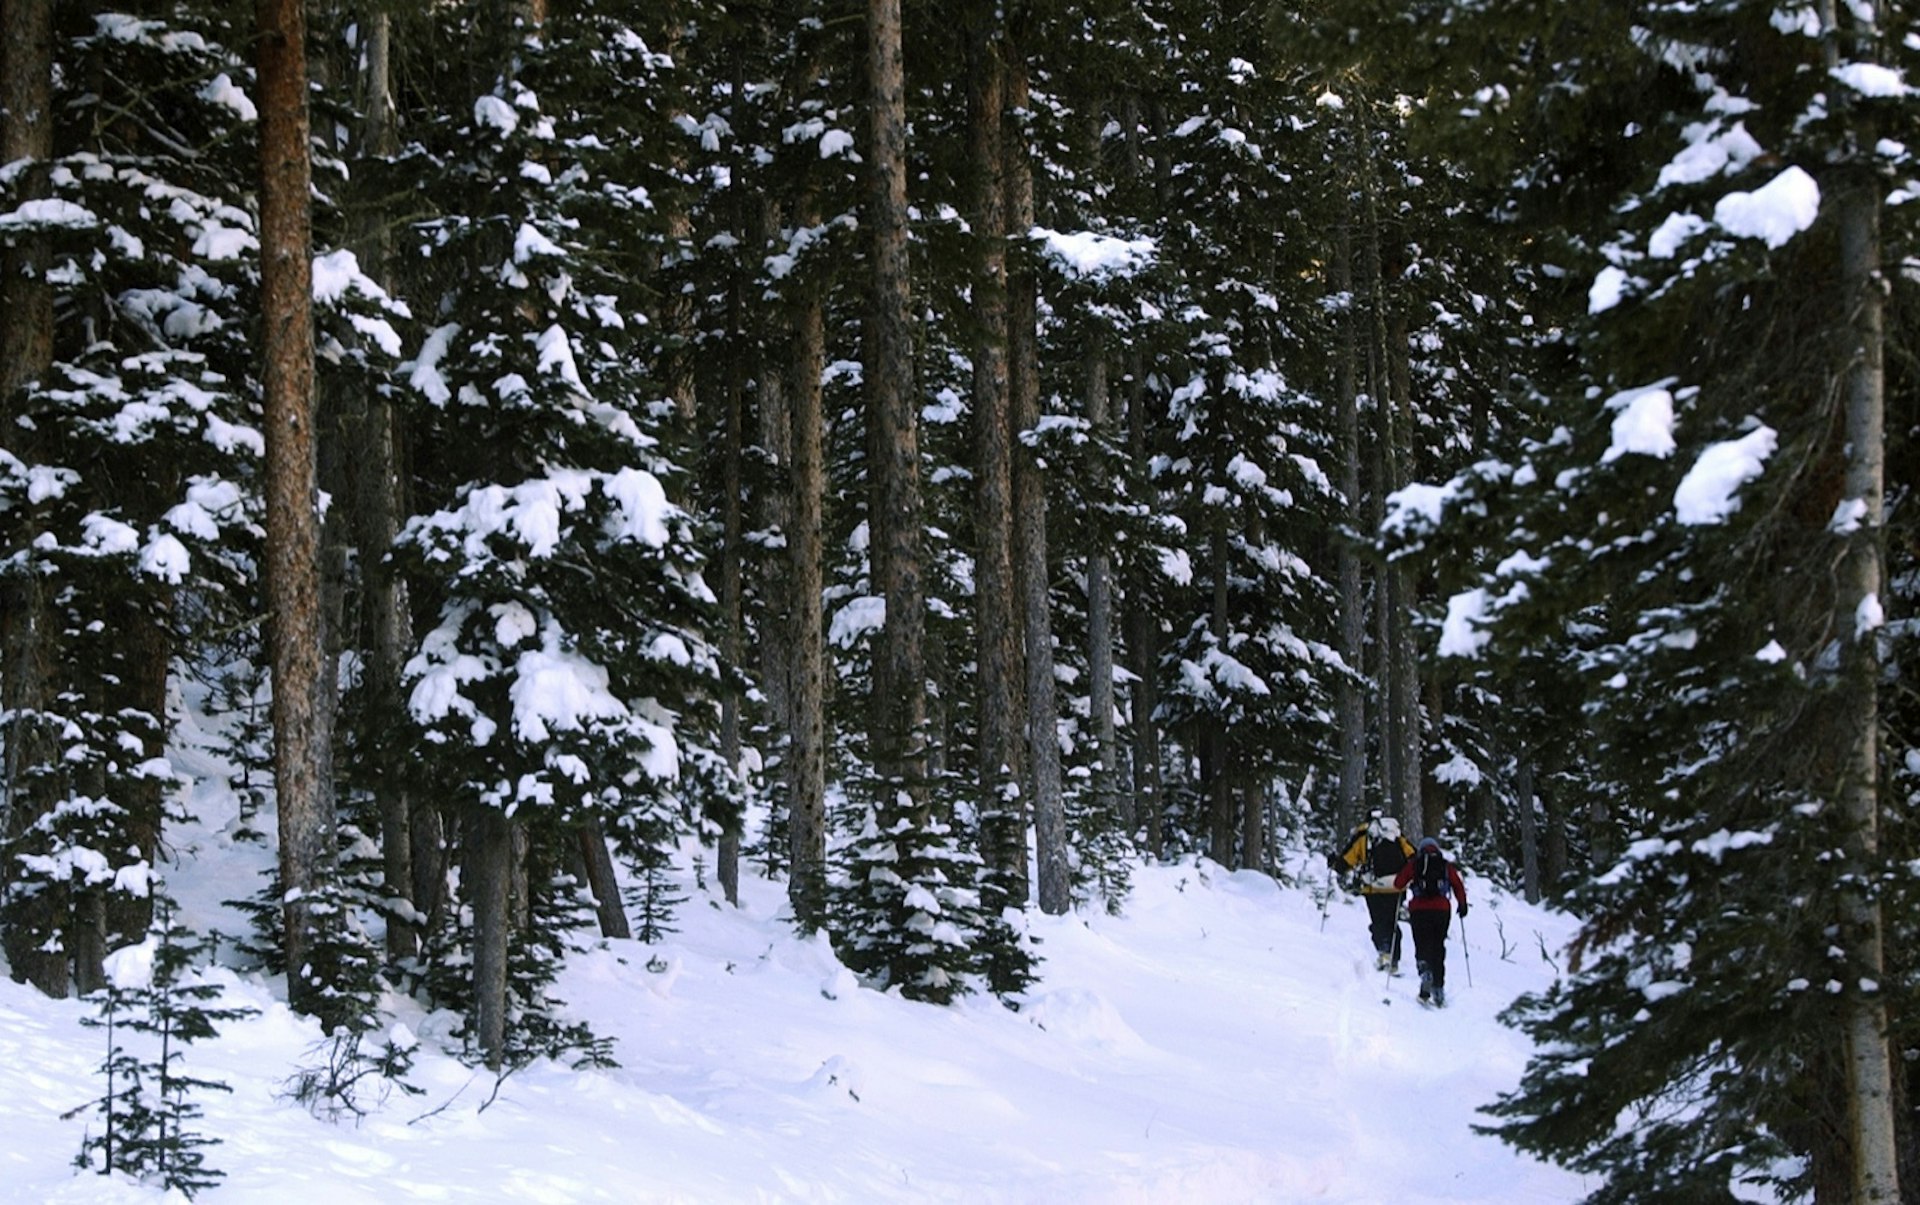 Two skiers traverse a snowy trail as tall trees surround them on all sides